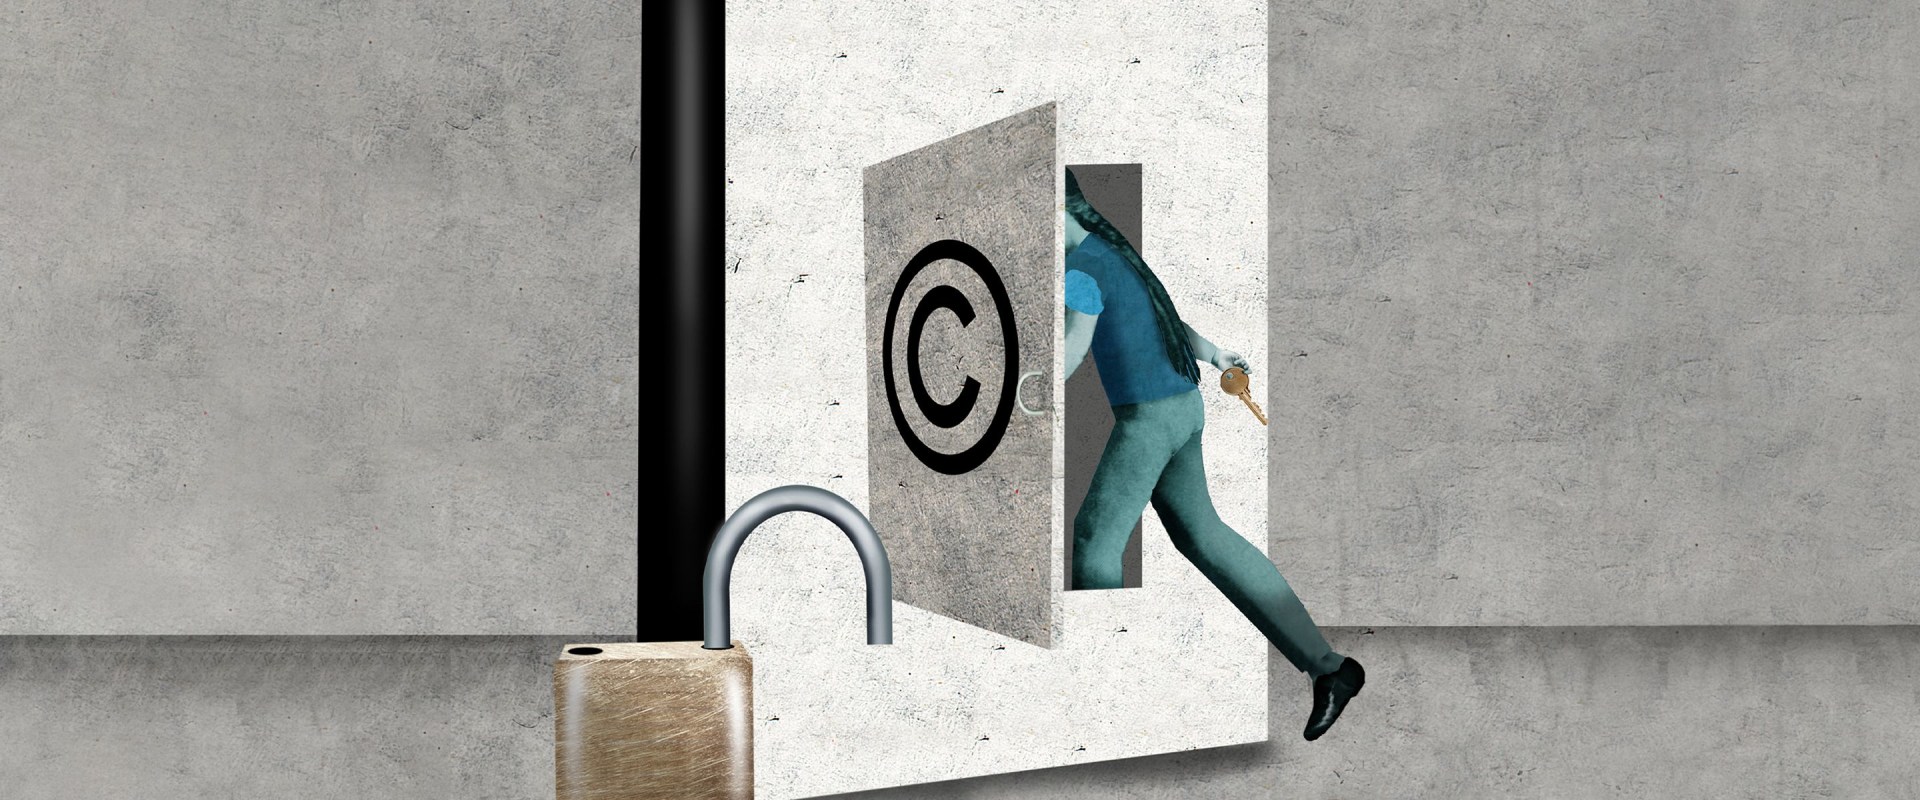 How many copyright laws are there?